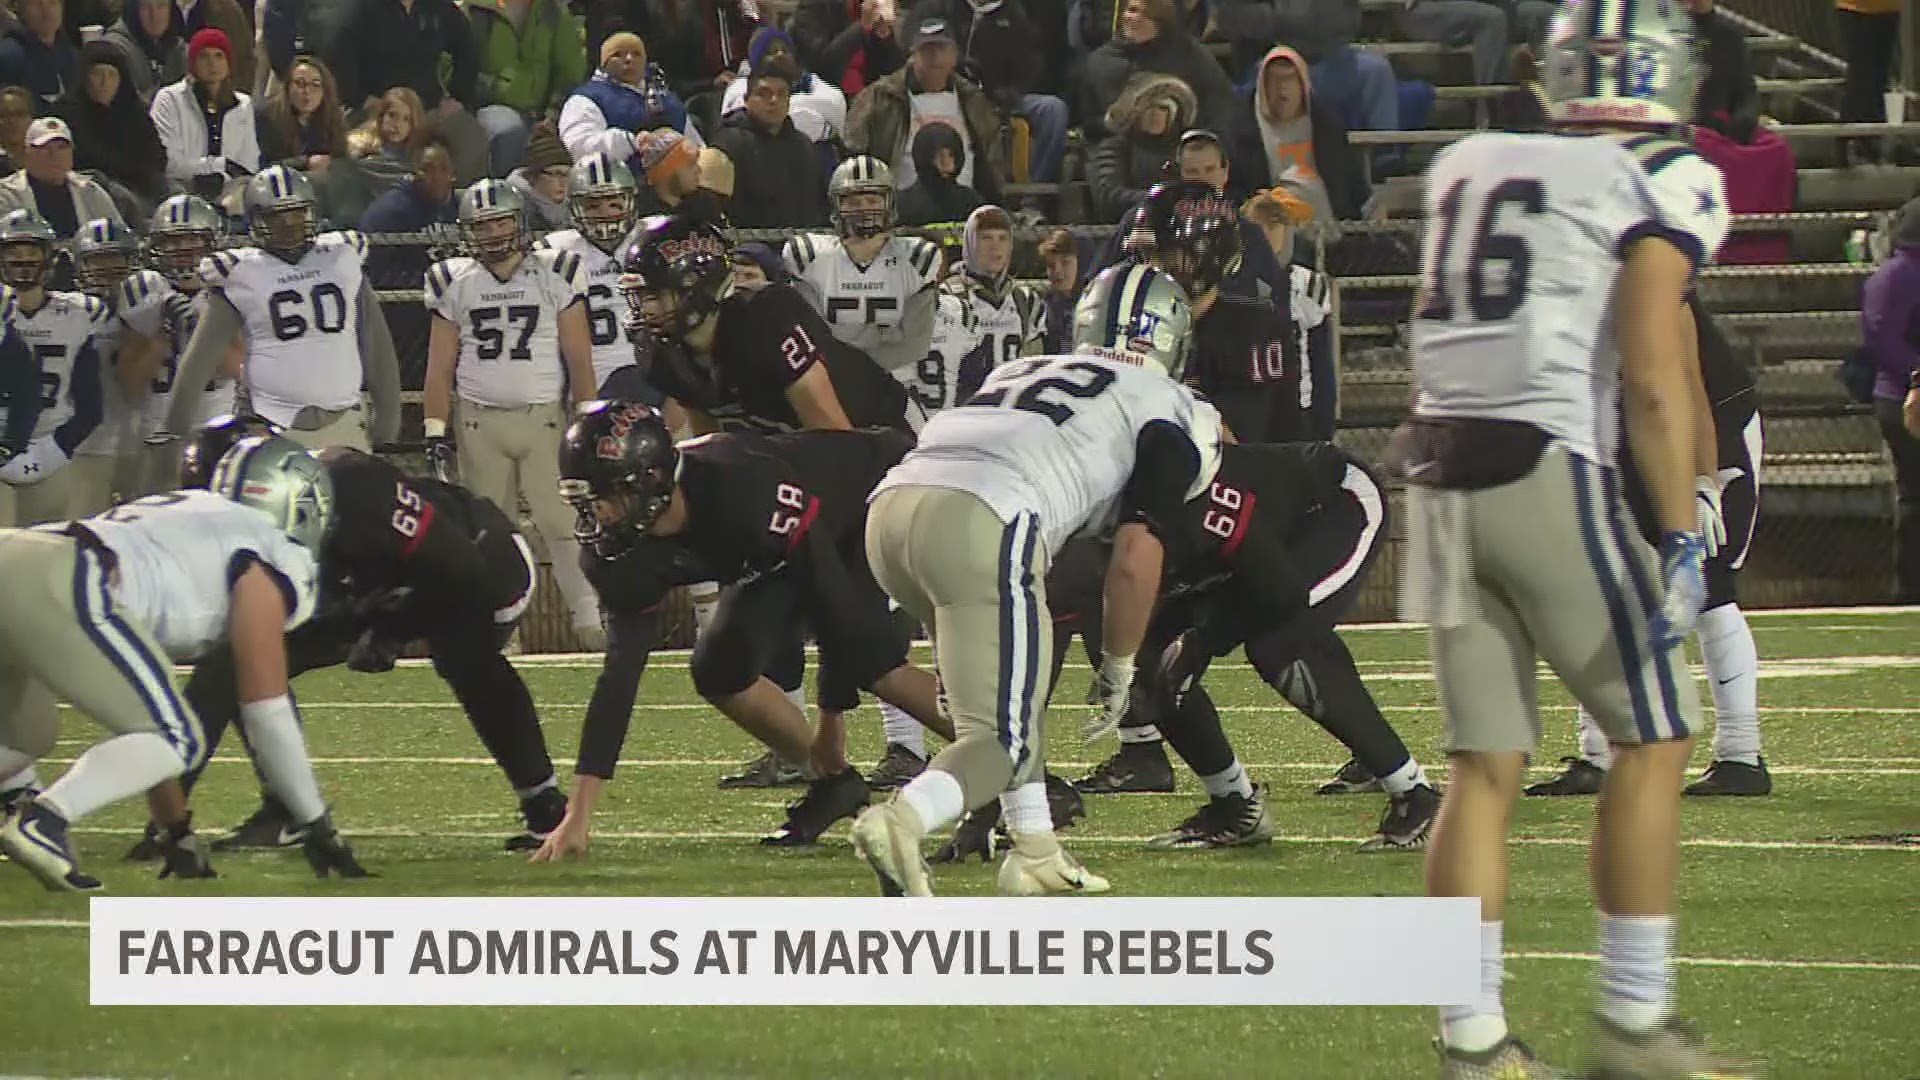 The Rebels beat the Admirals to earn their 19th straight trip to the semifinals. Maryville will play at Oakland on November 23.